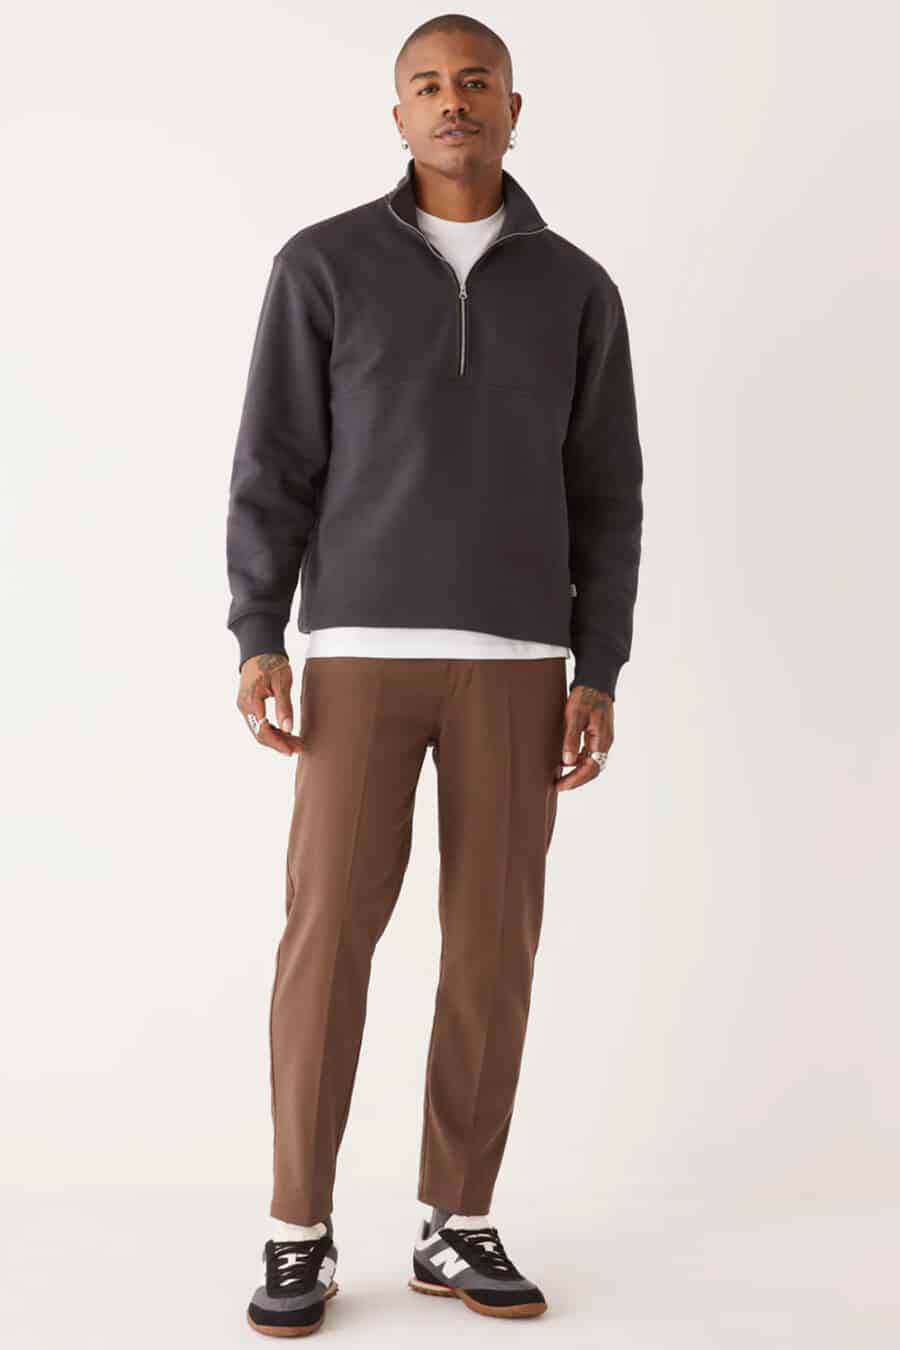 Men's brown pants, white T-shirt, charcoal zip-neck sweater and New Balance running sneakers outfit